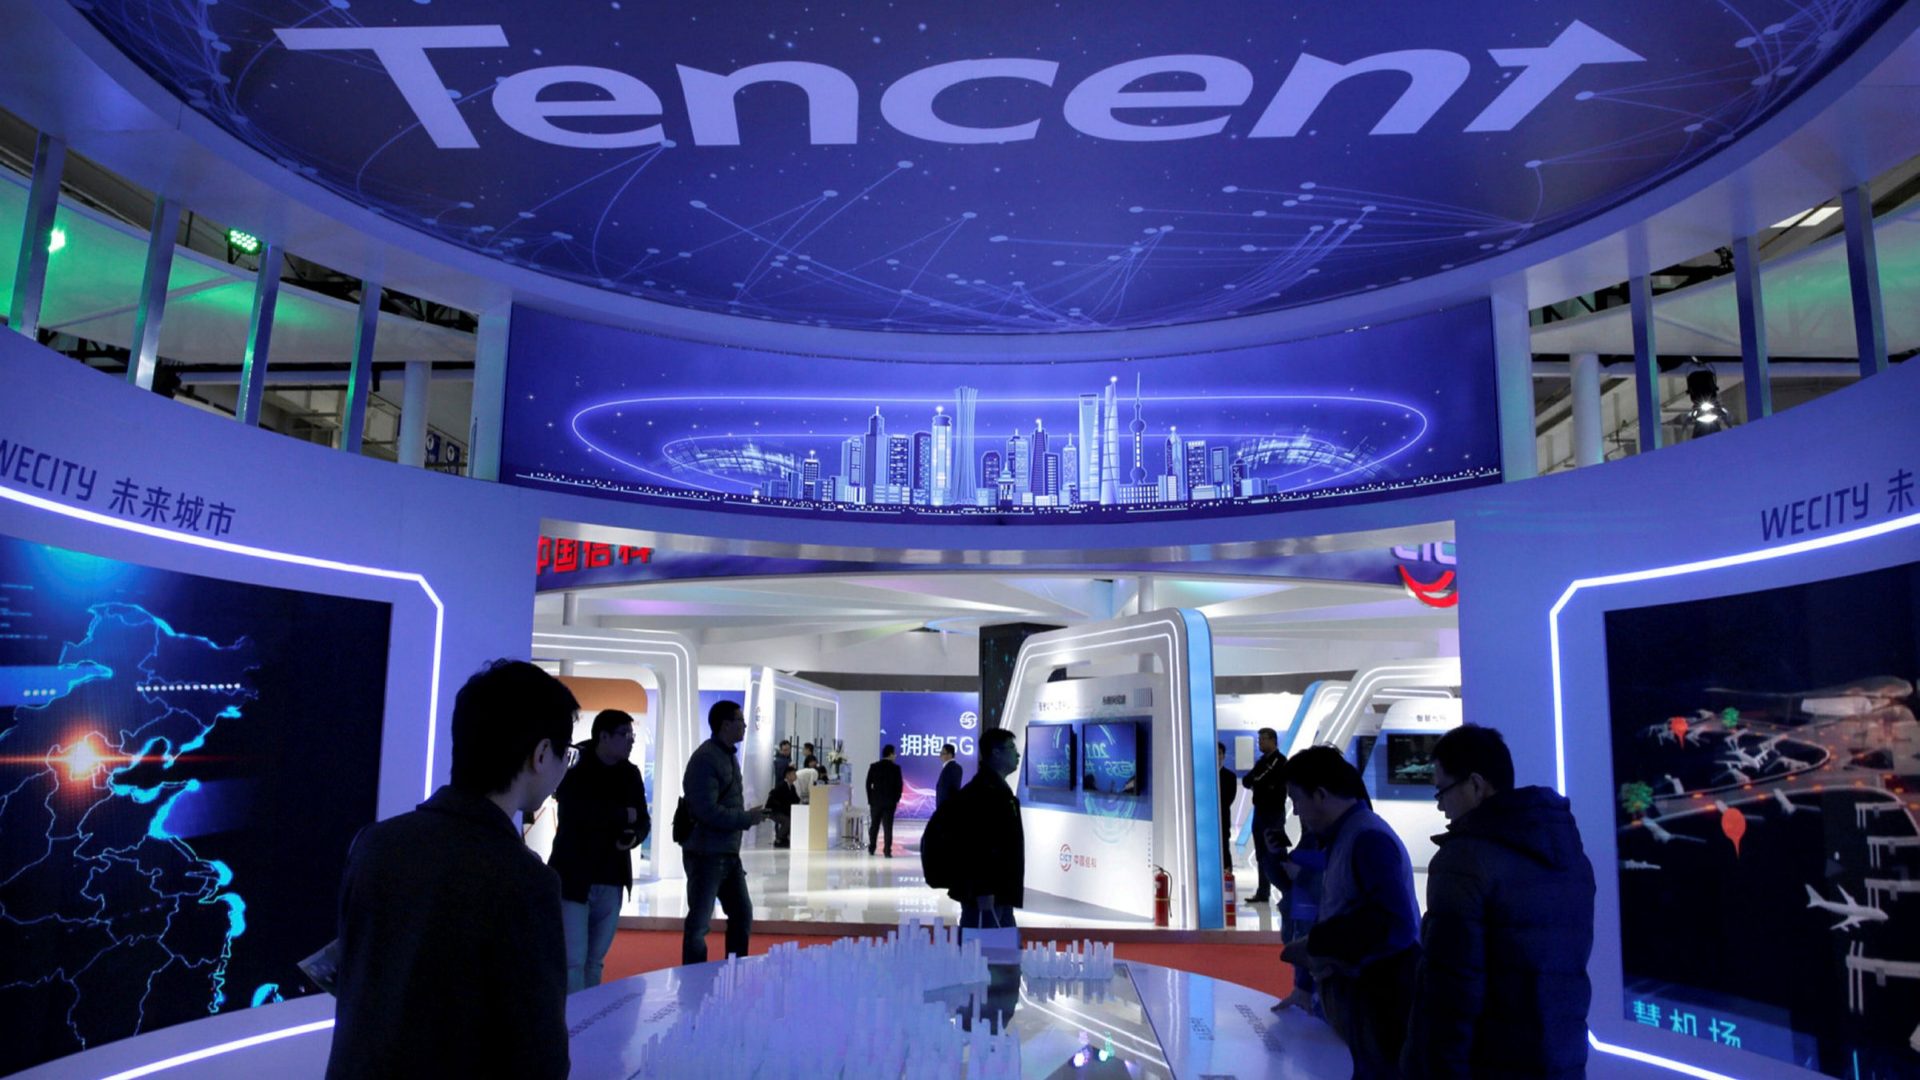 sources tencent timi studios kings duty